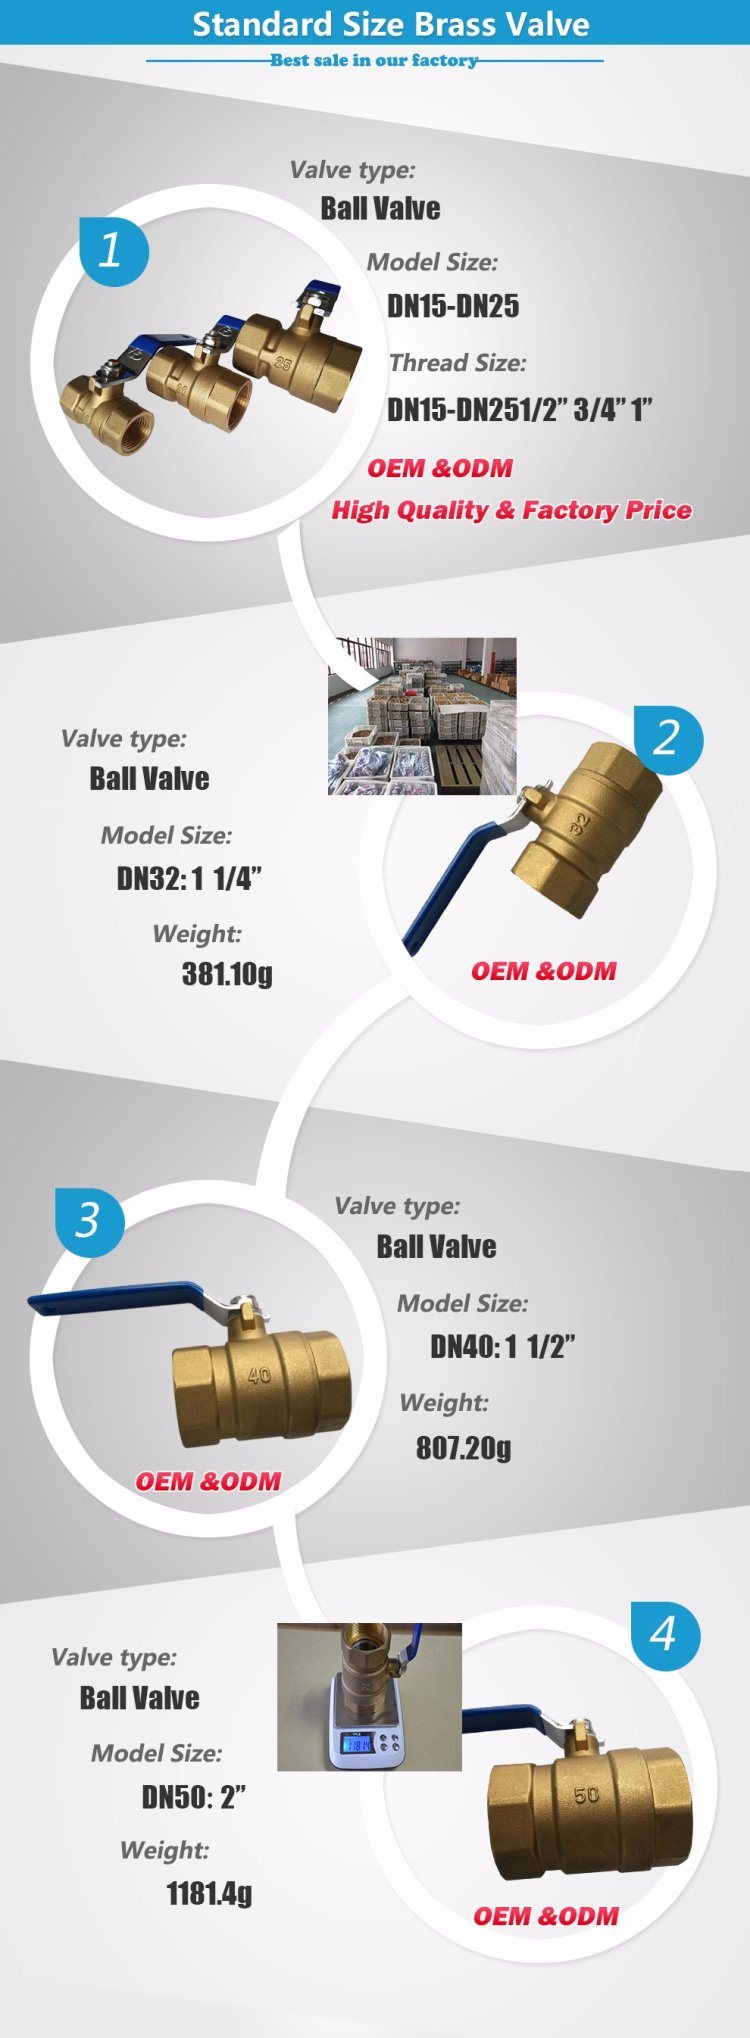 Hot Selling Welded and Sanitary Ball Valve Dn40